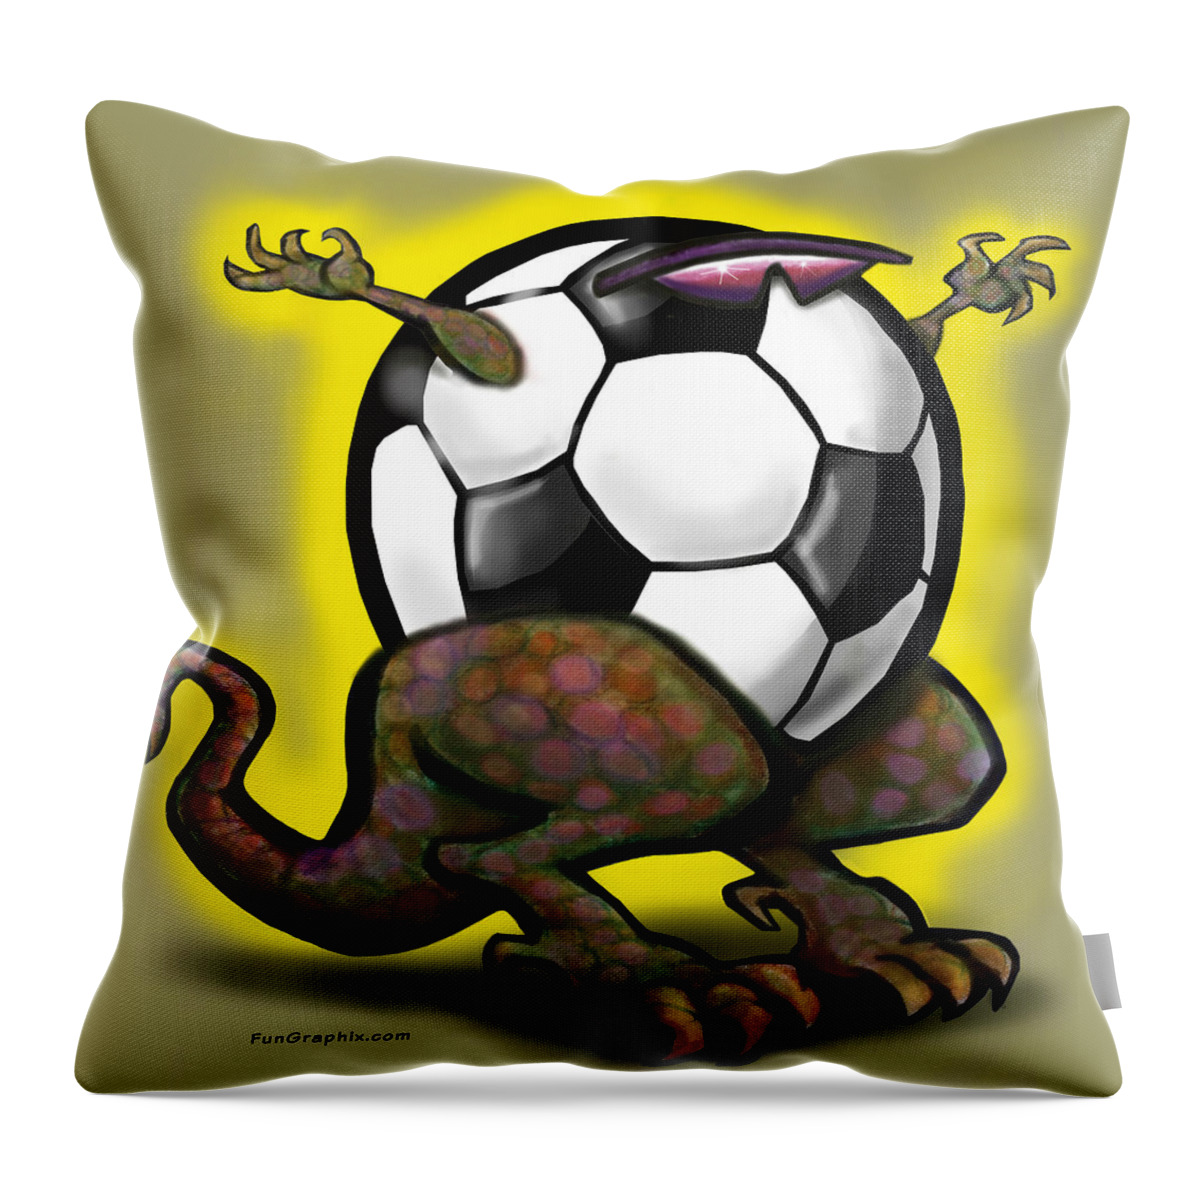 Soccer Throw Pillow featuring the digital art Soccer Zilla by Kevin Middleton